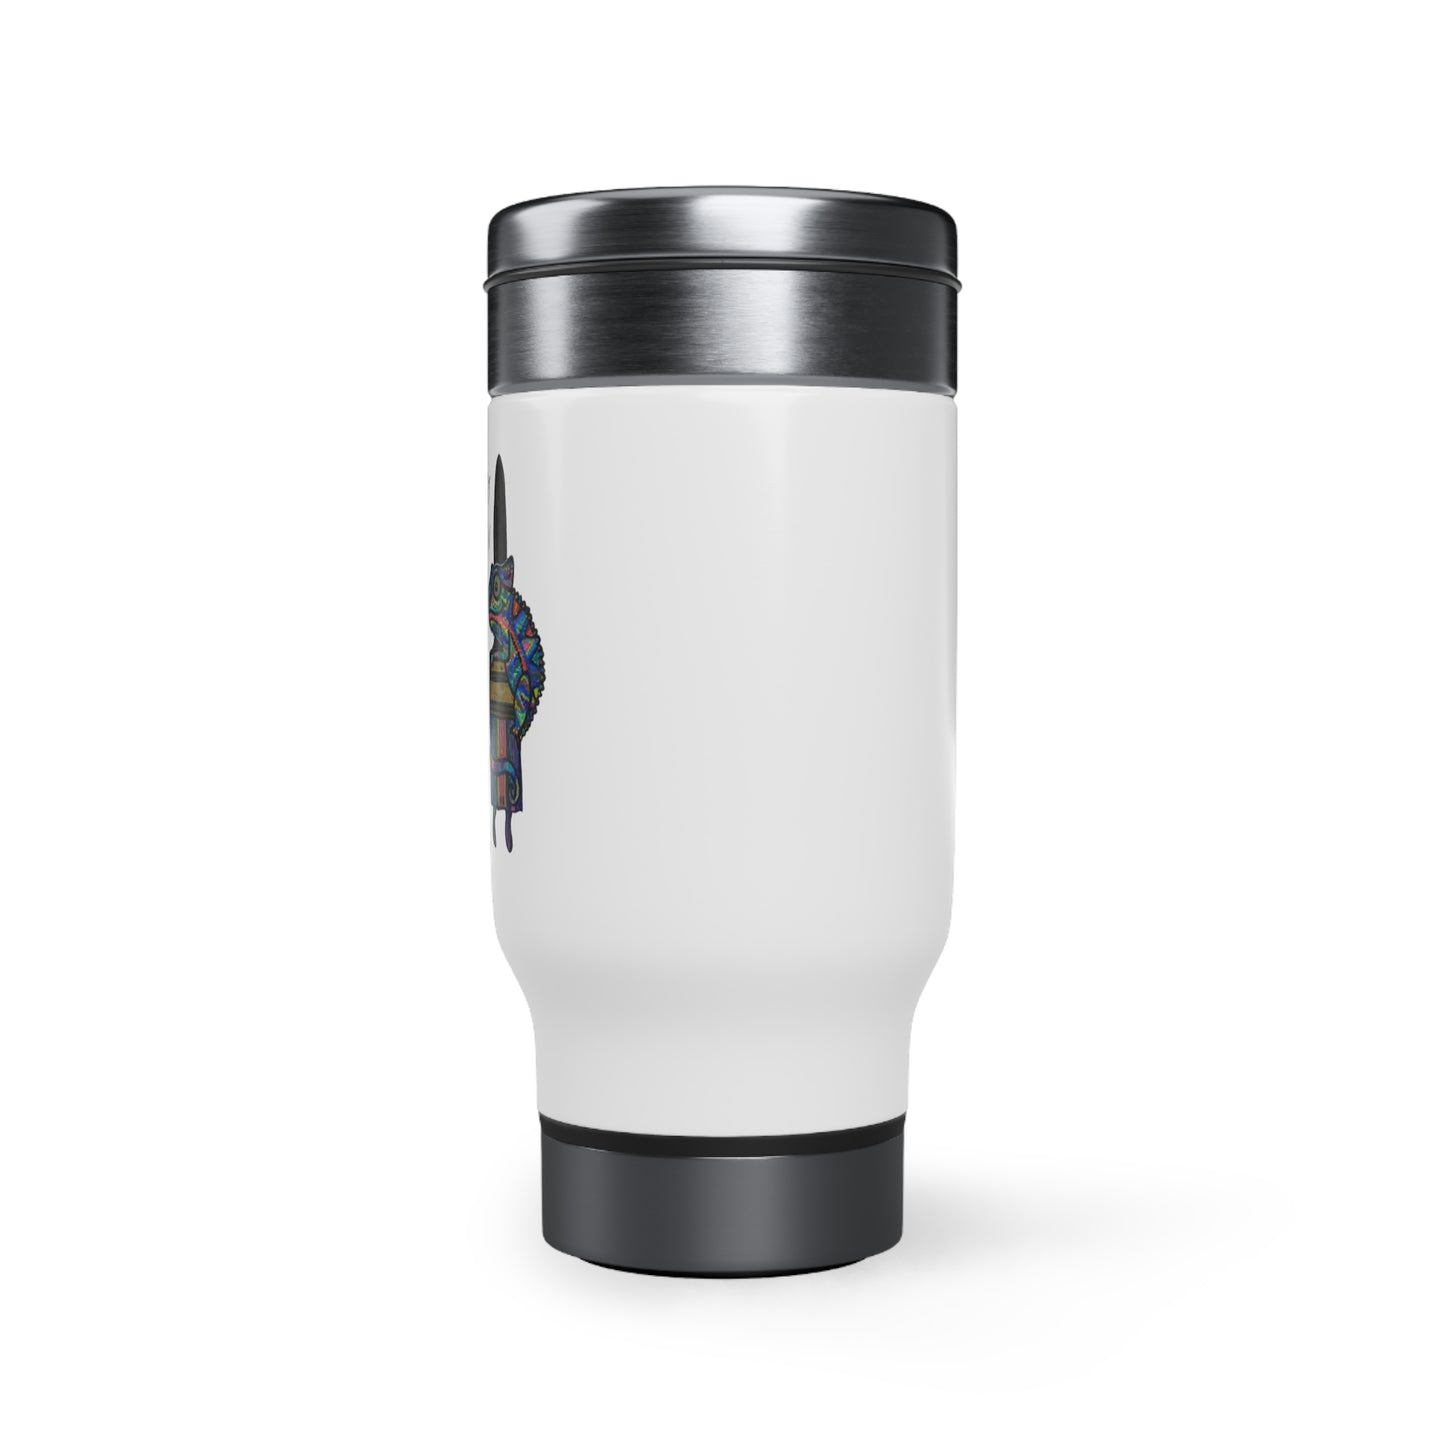 Why fit in When you born to stand out - Stainless Steel Travel Mug with Handle, 14oz